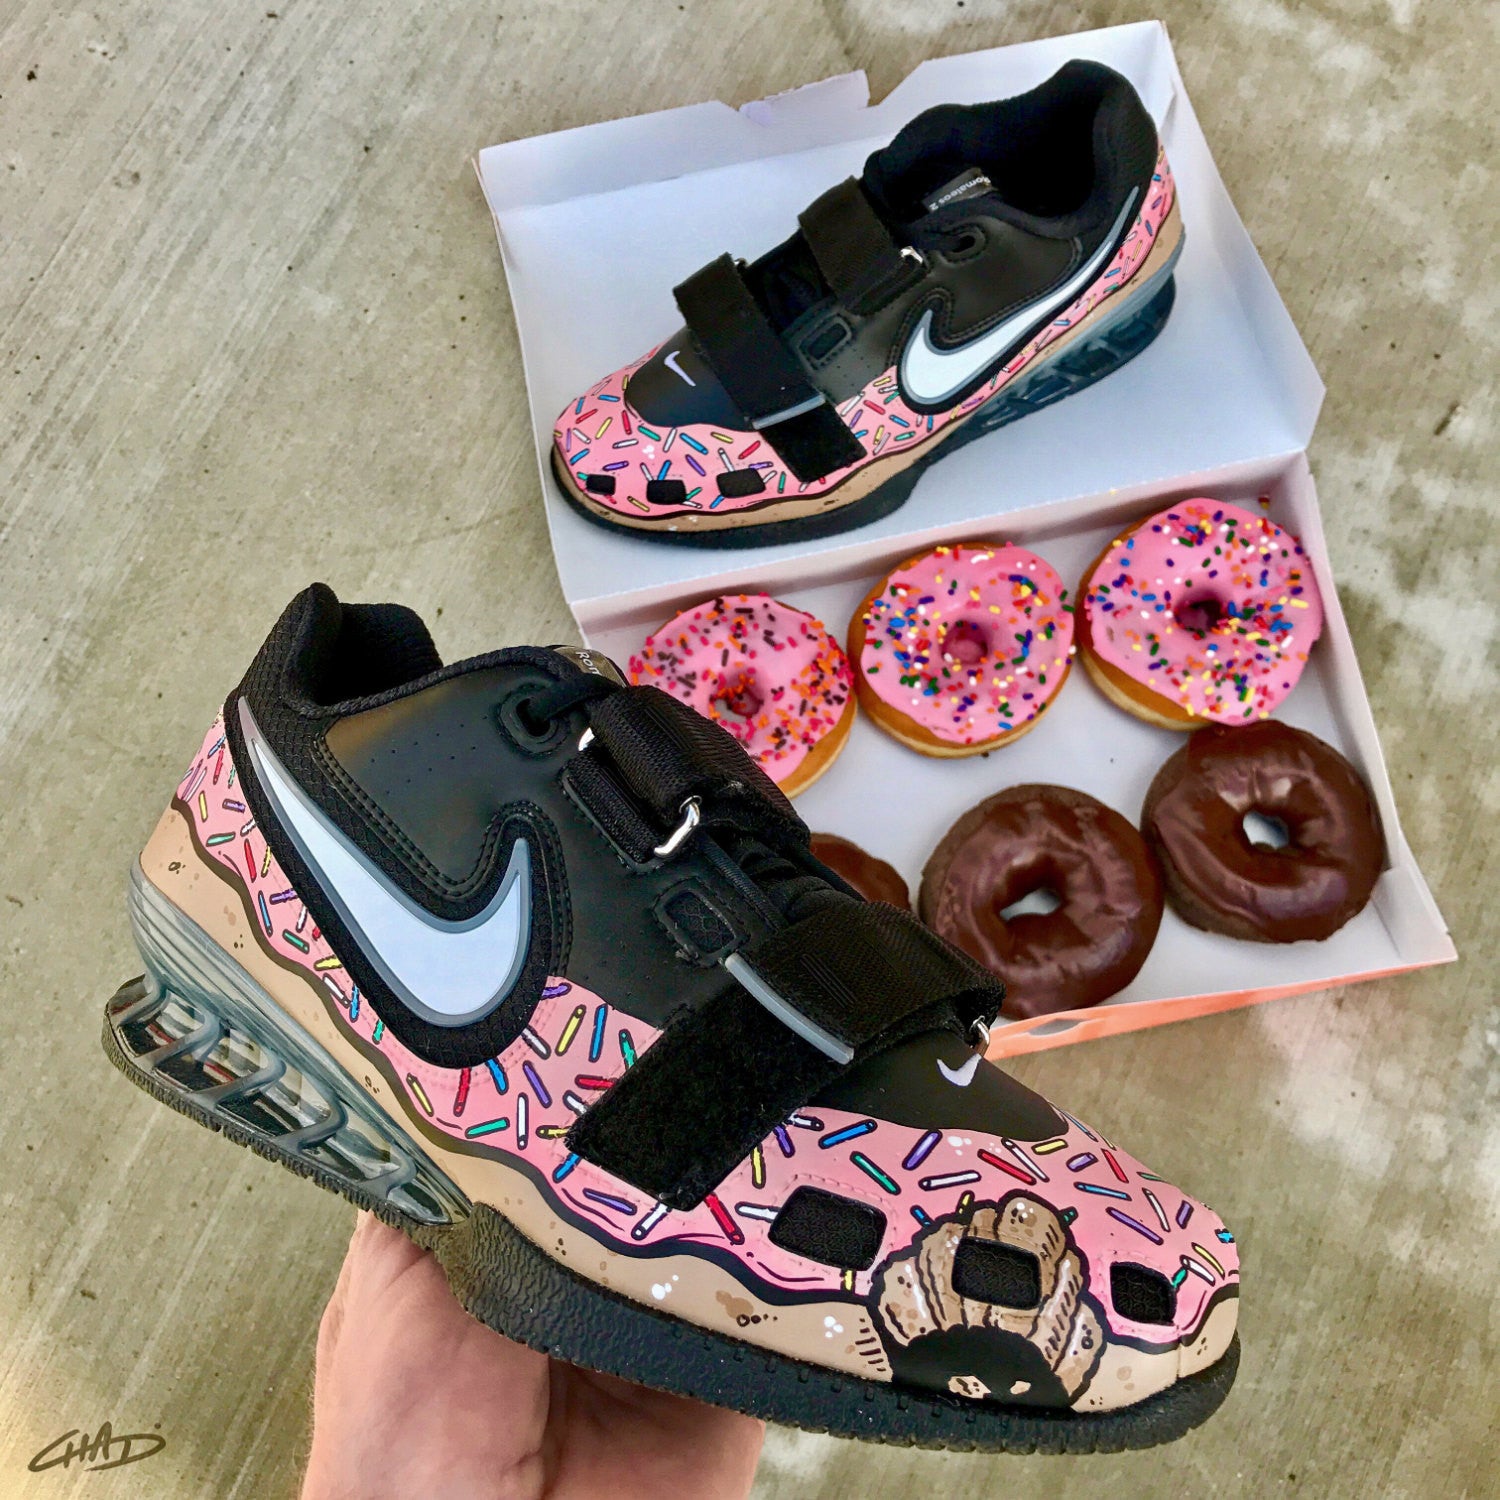 Que agradable Optimista alineación Custom pink sprinkled donut Hand painted Nike Romaleos olympic weightl –  chadcantcolor